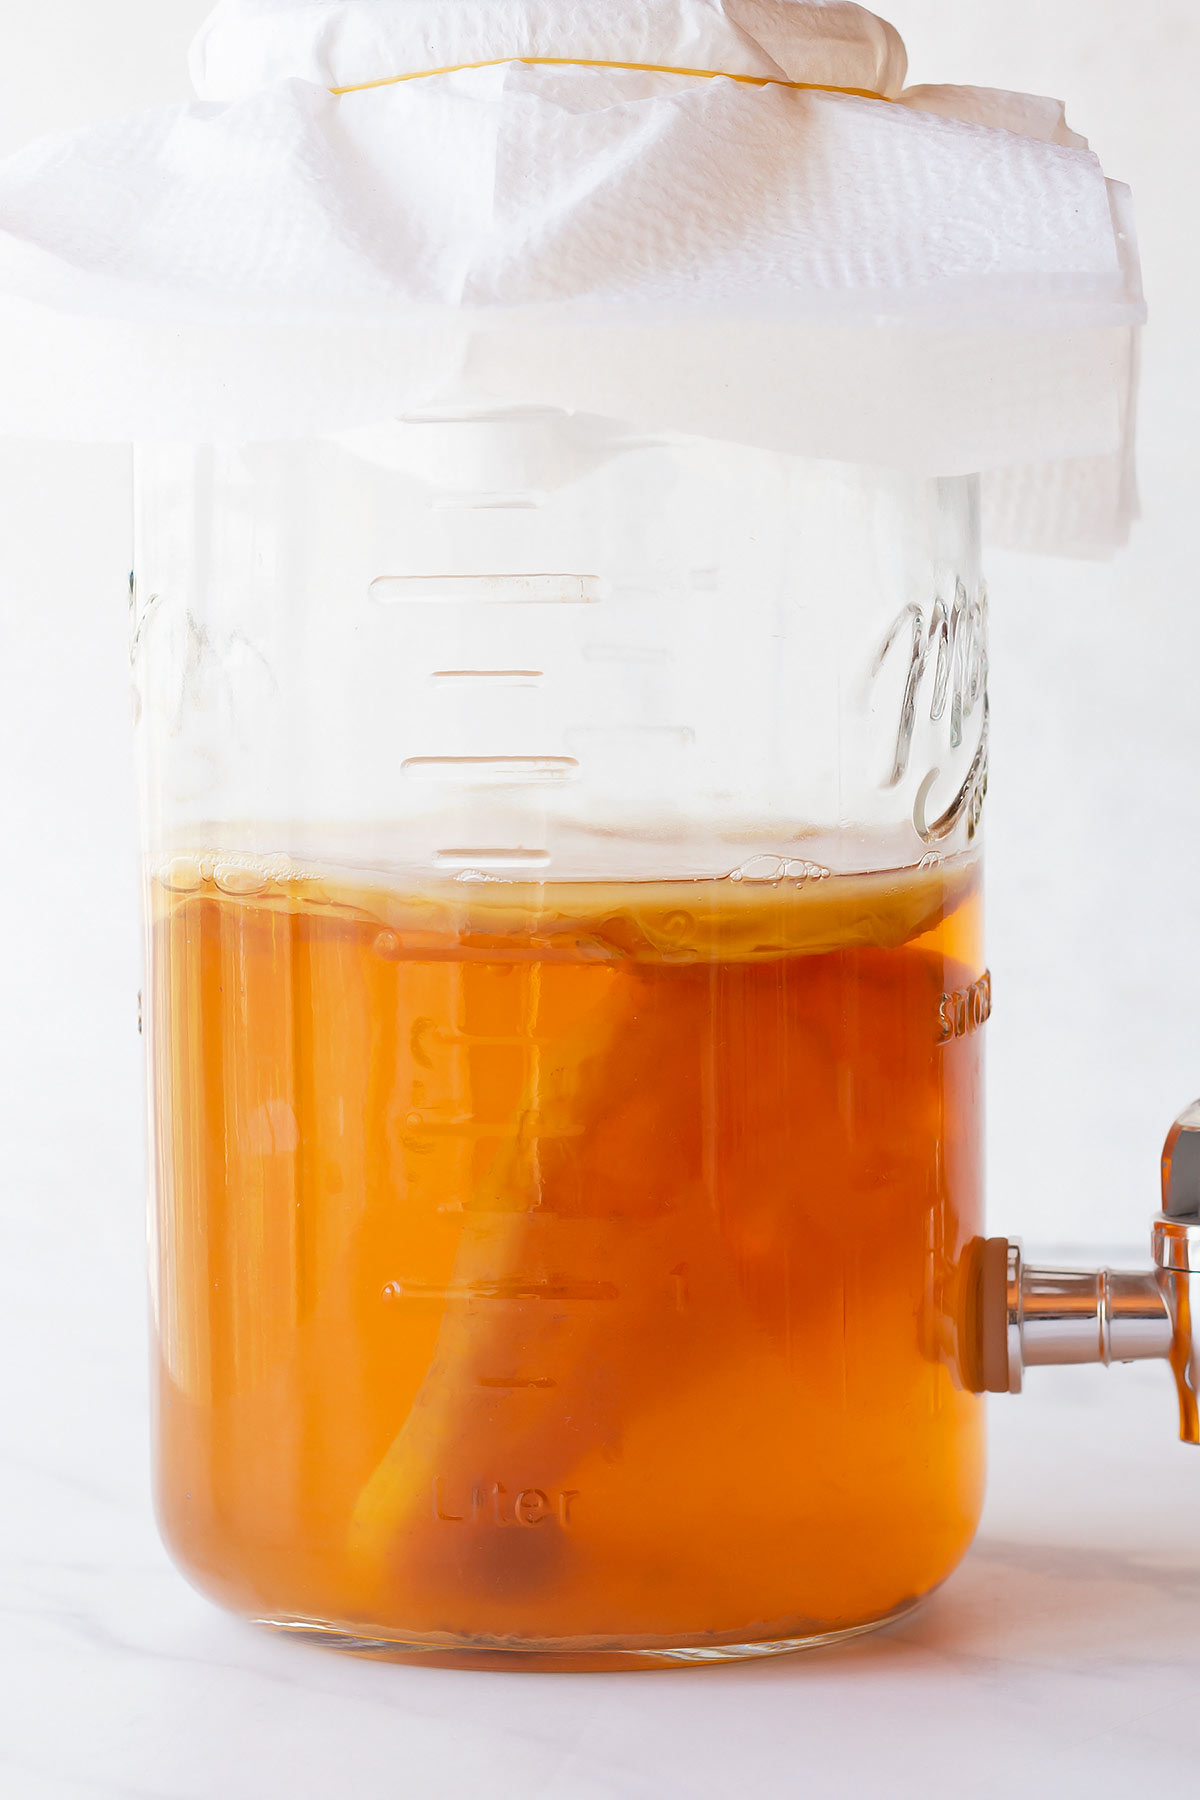 Gallon jar with kombucha ferment and scoby suspended inside